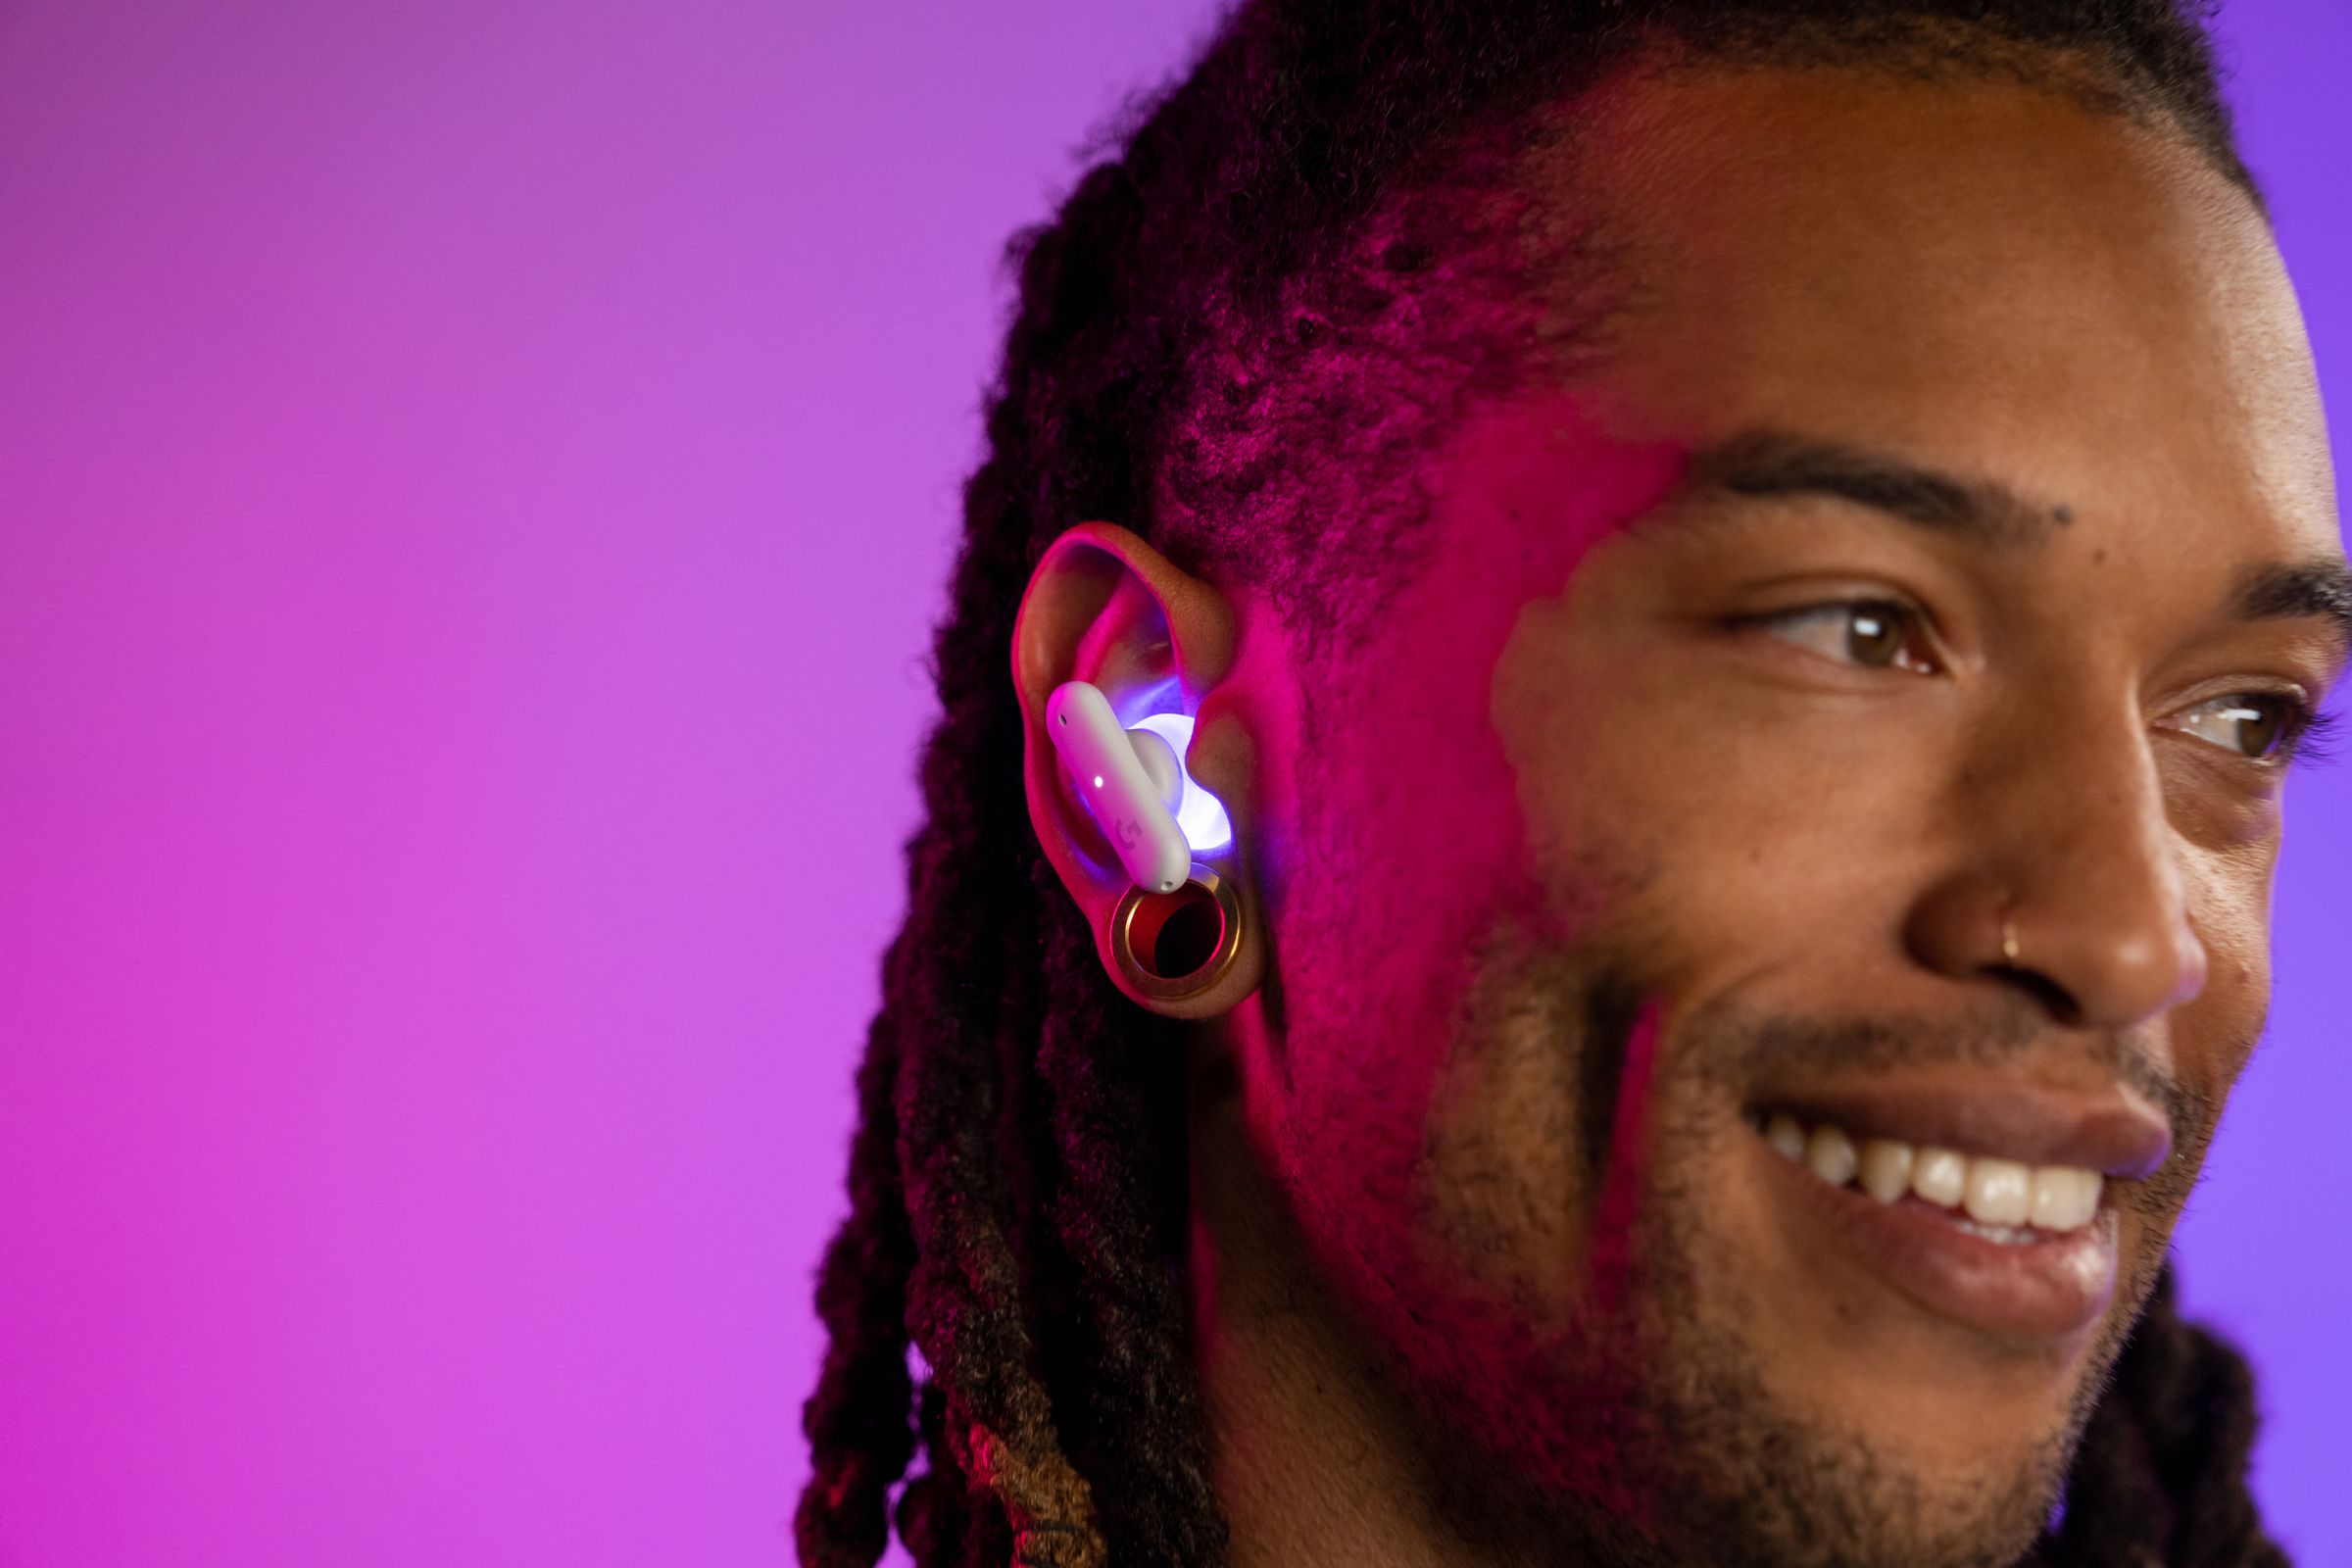 A model turning to the side, smiling, while wearing the Logitech G Fits earbuds